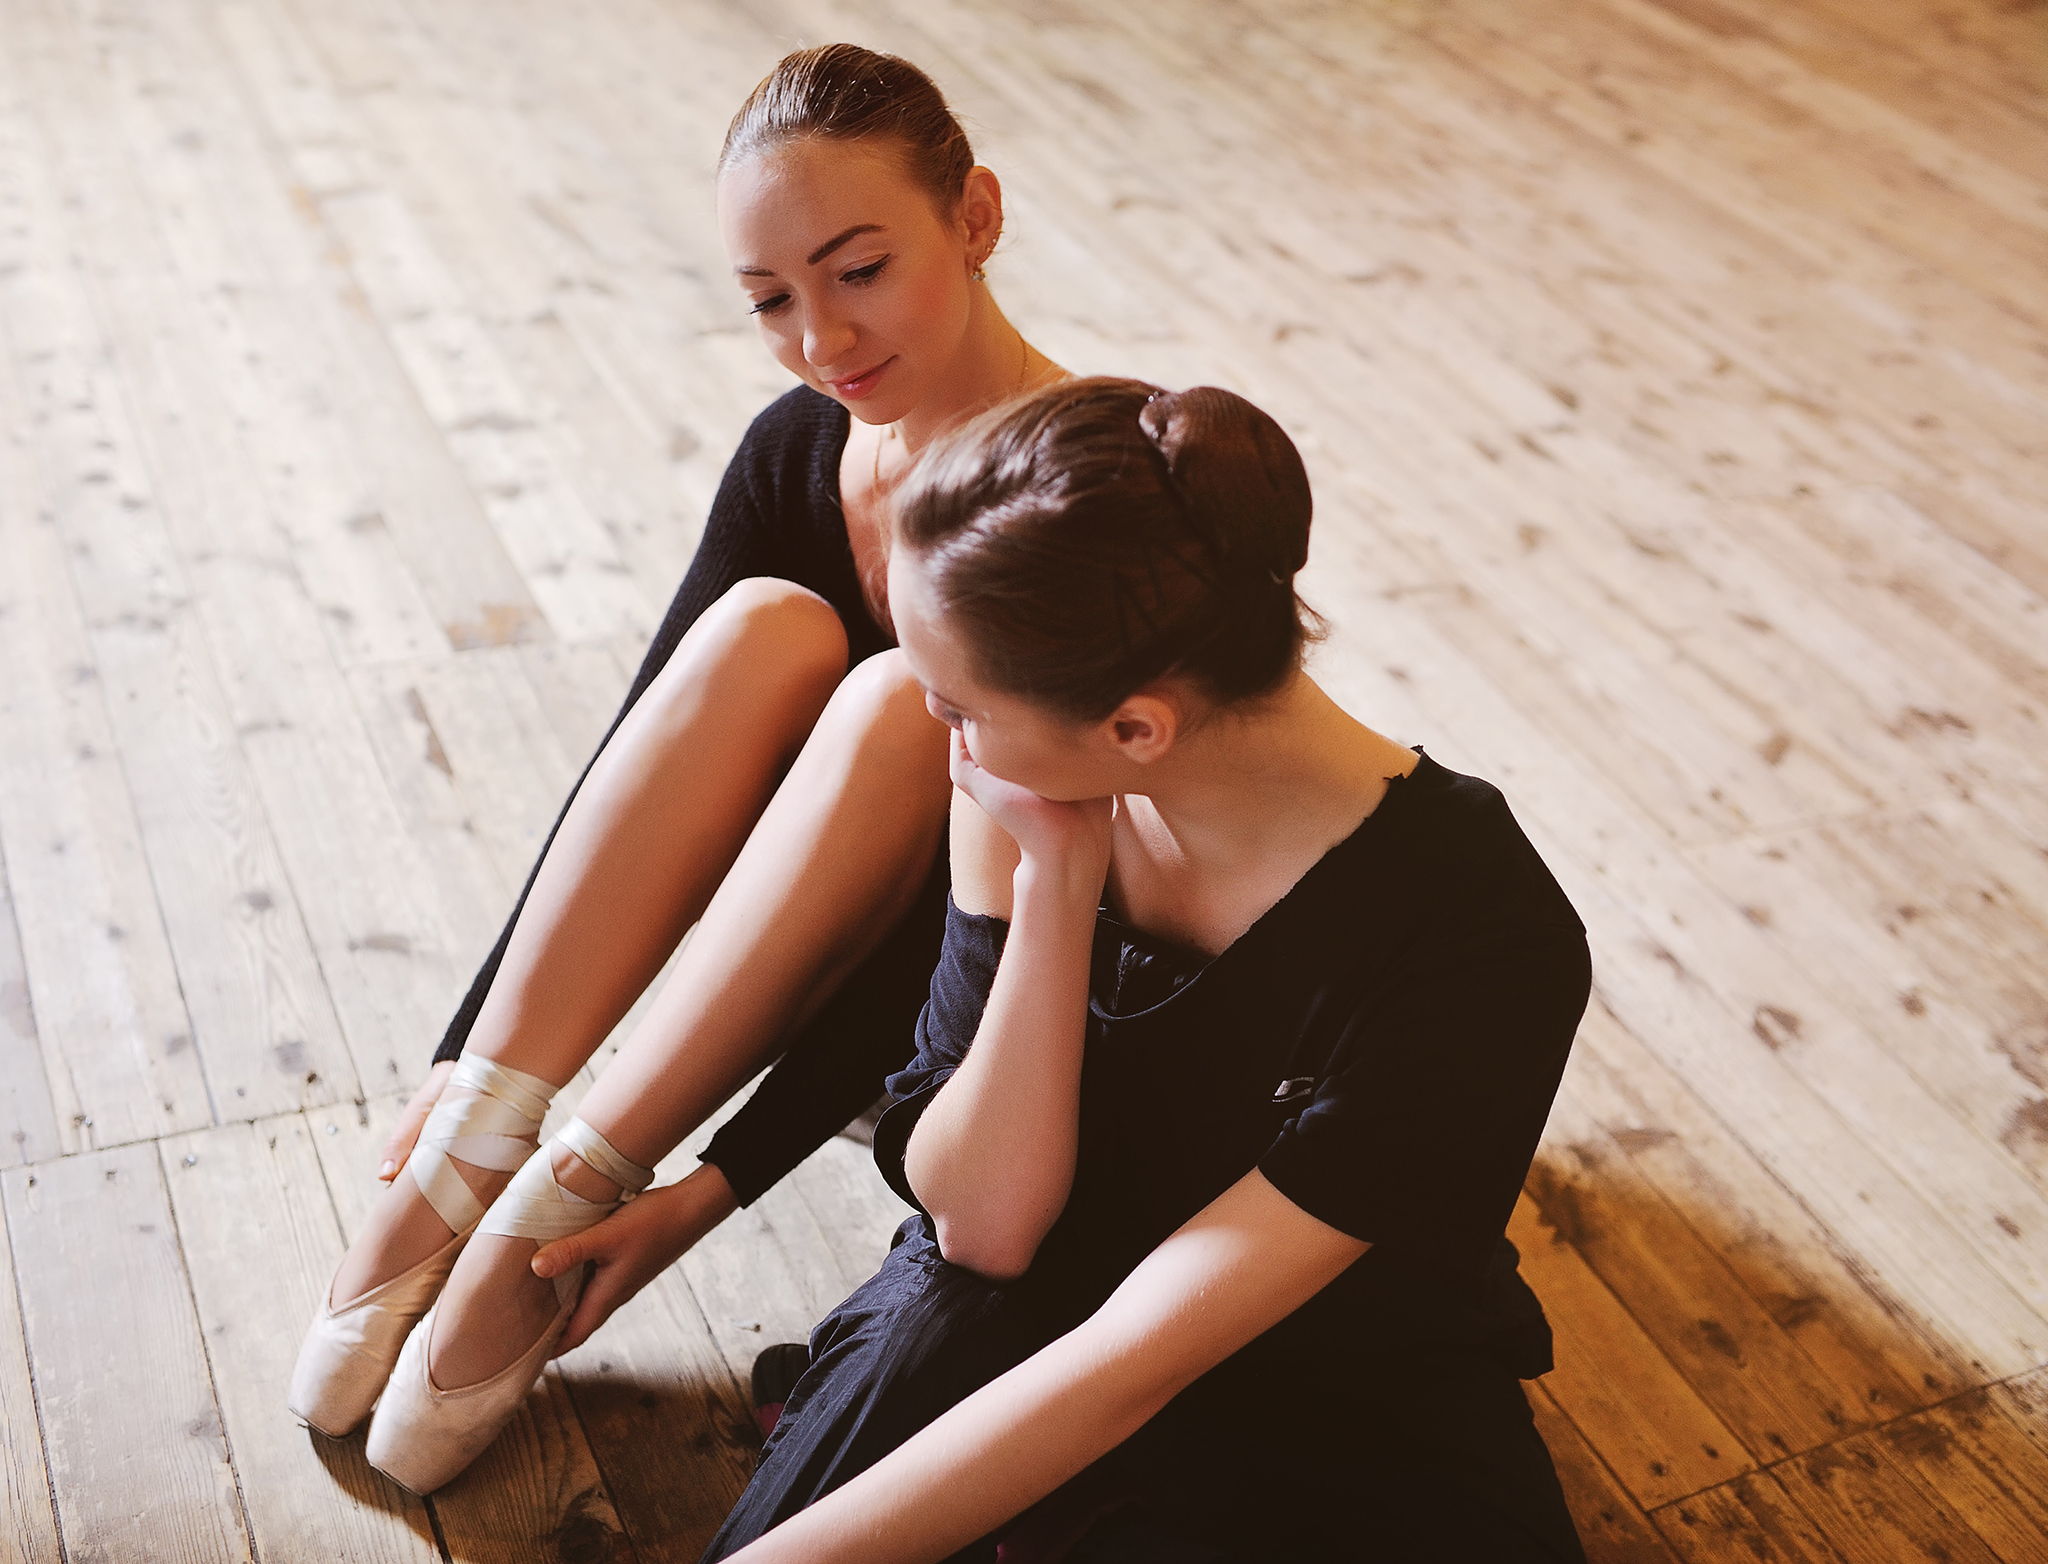 two ballerinas talking and smiling sitting on a wooden floor